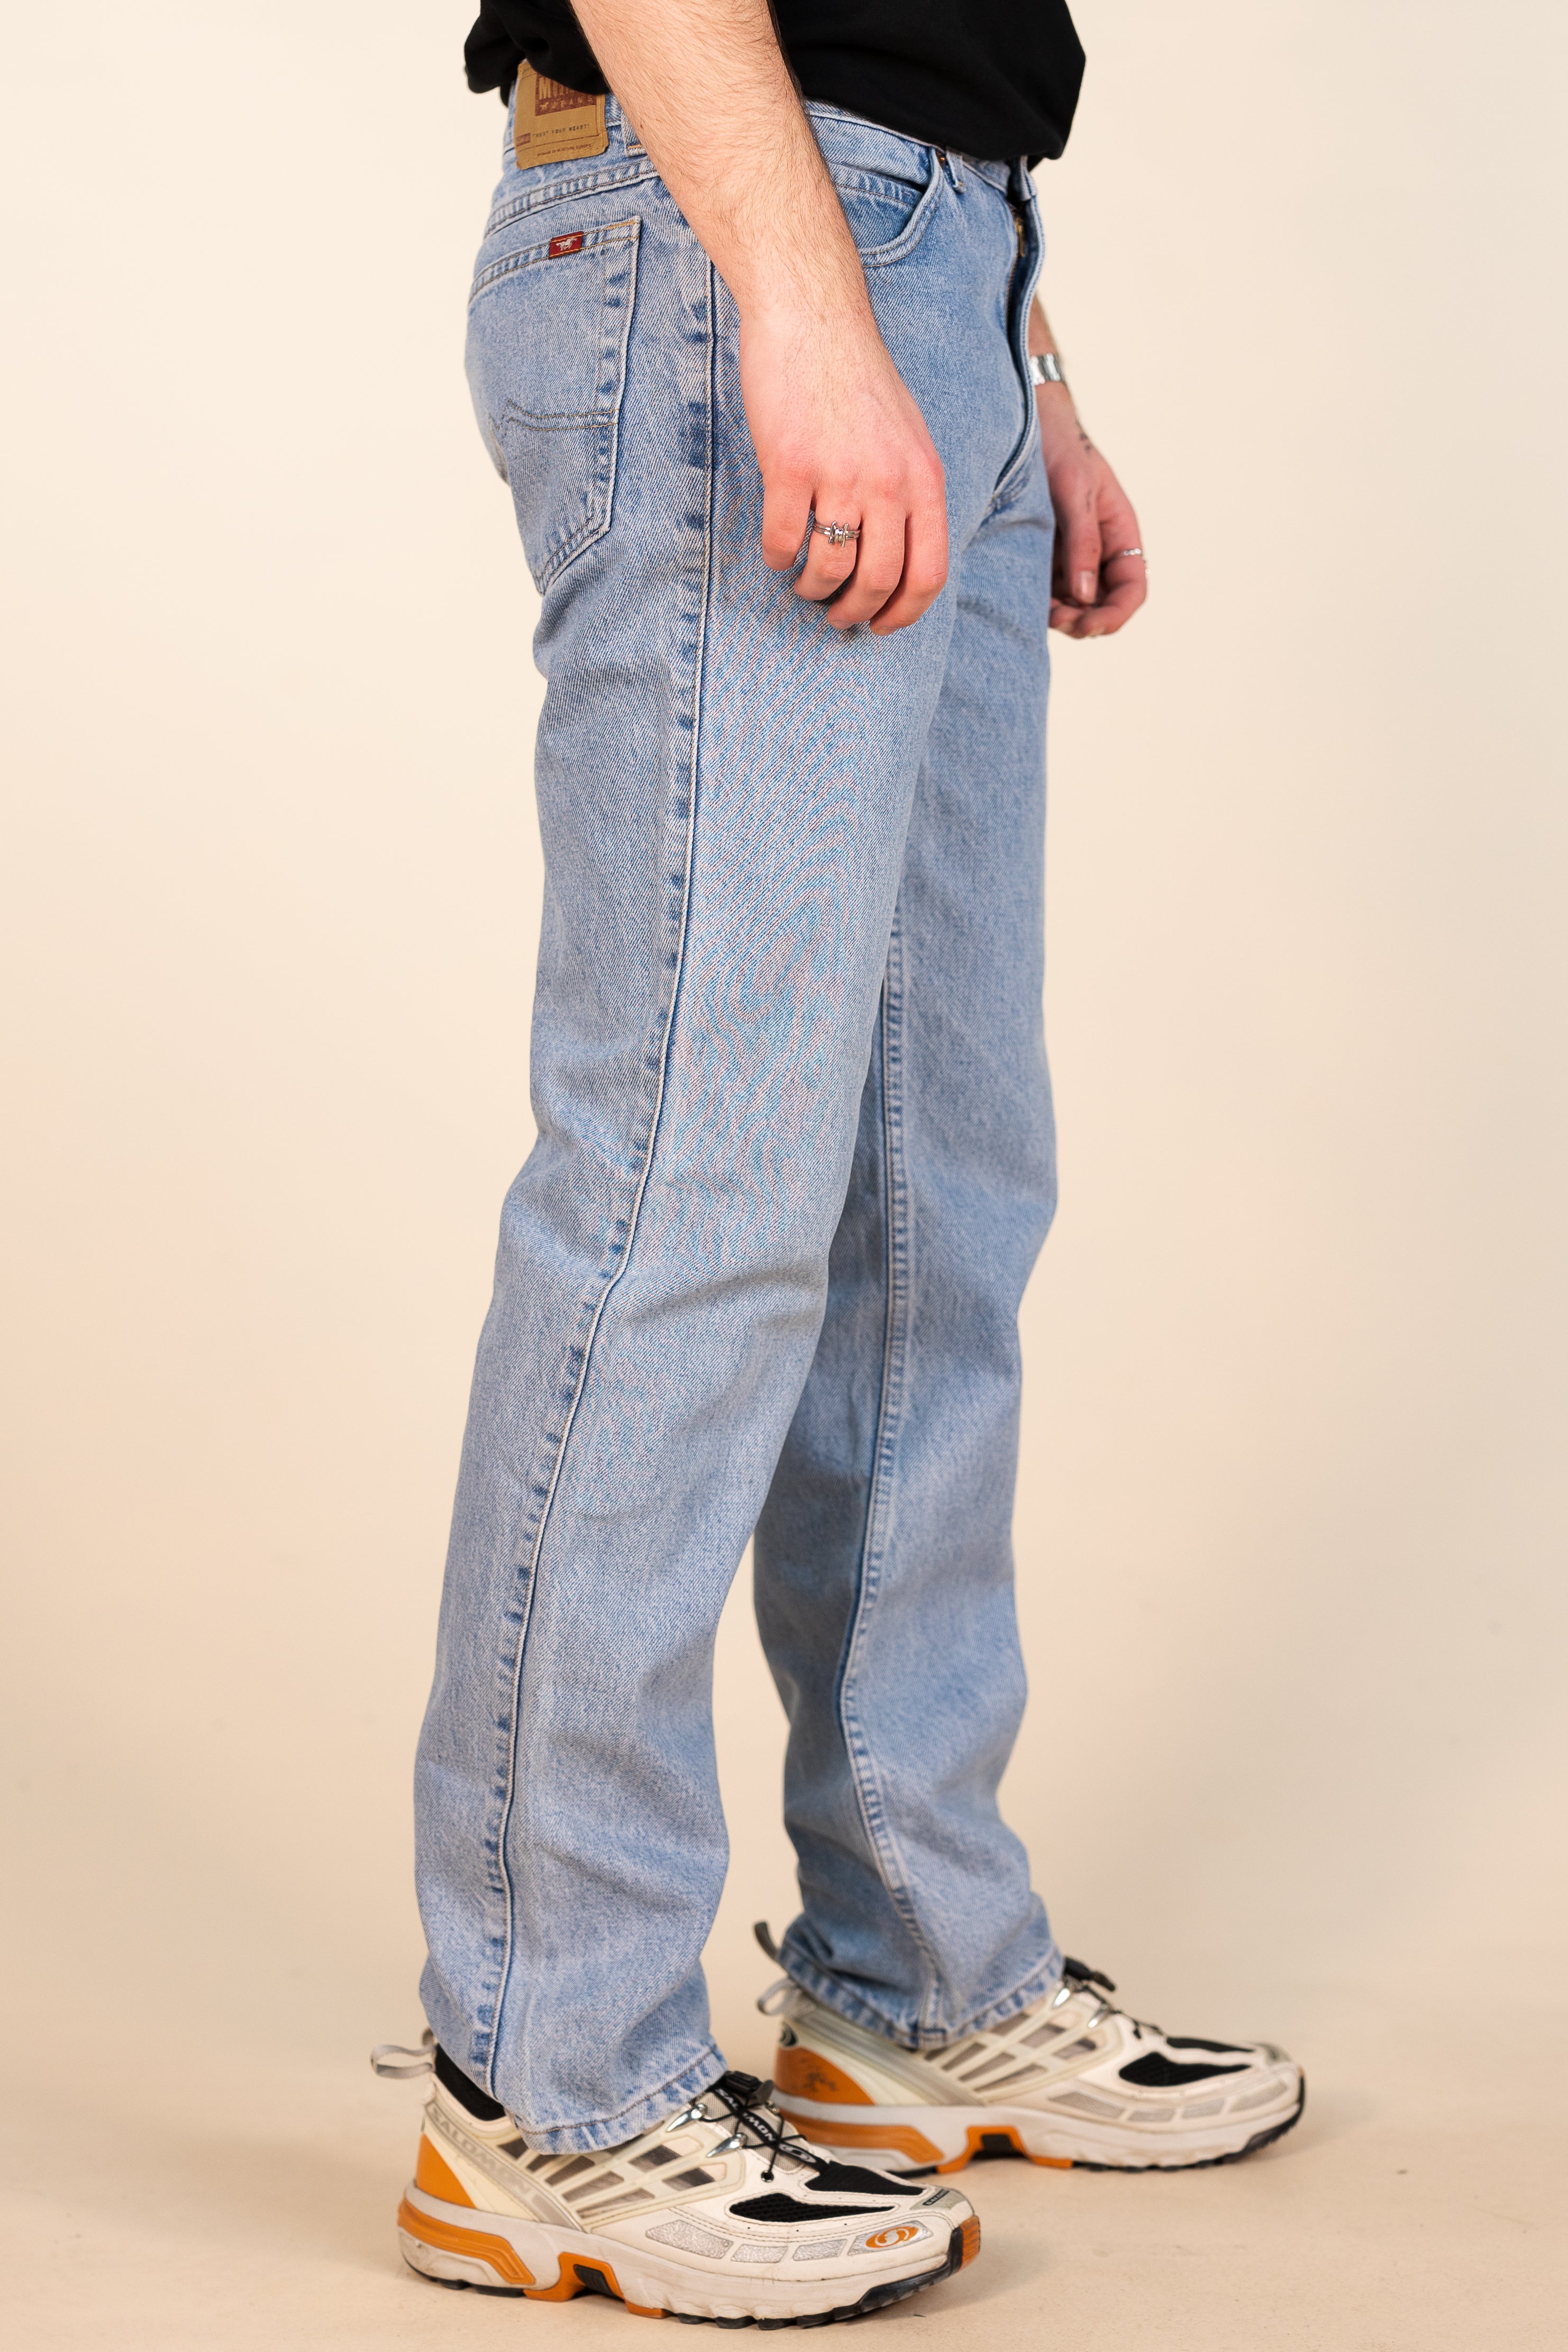 90s Jeans